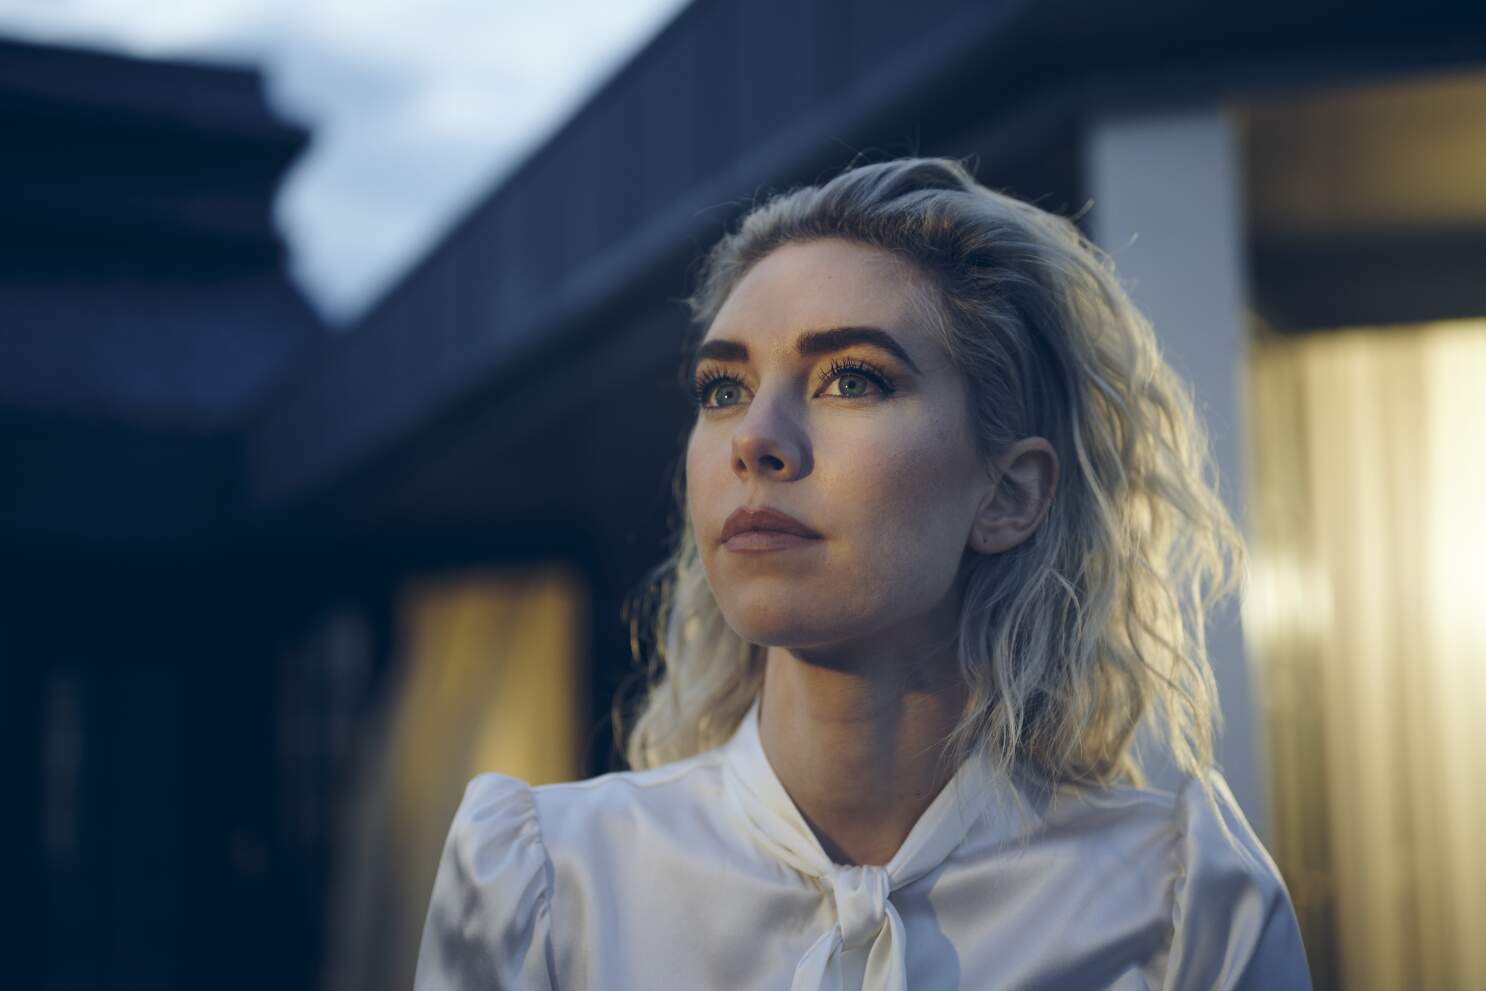 Pieces of a Woman review: Vanessa Kirby shines in uneven Netflix drama